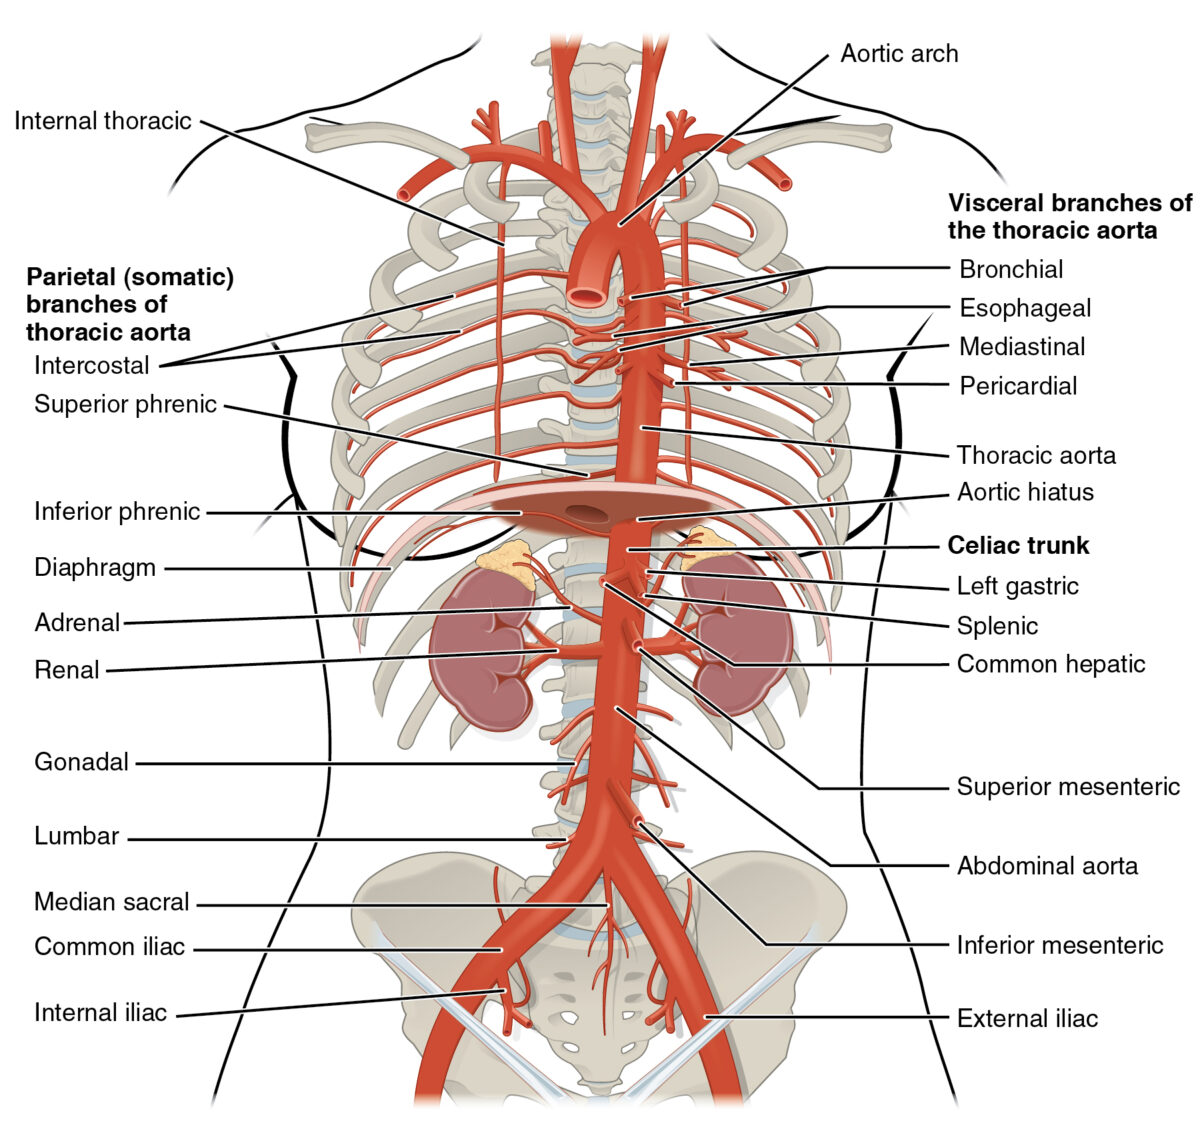 Image displaying some of the arteries responsible for the blood supply of the esophagus